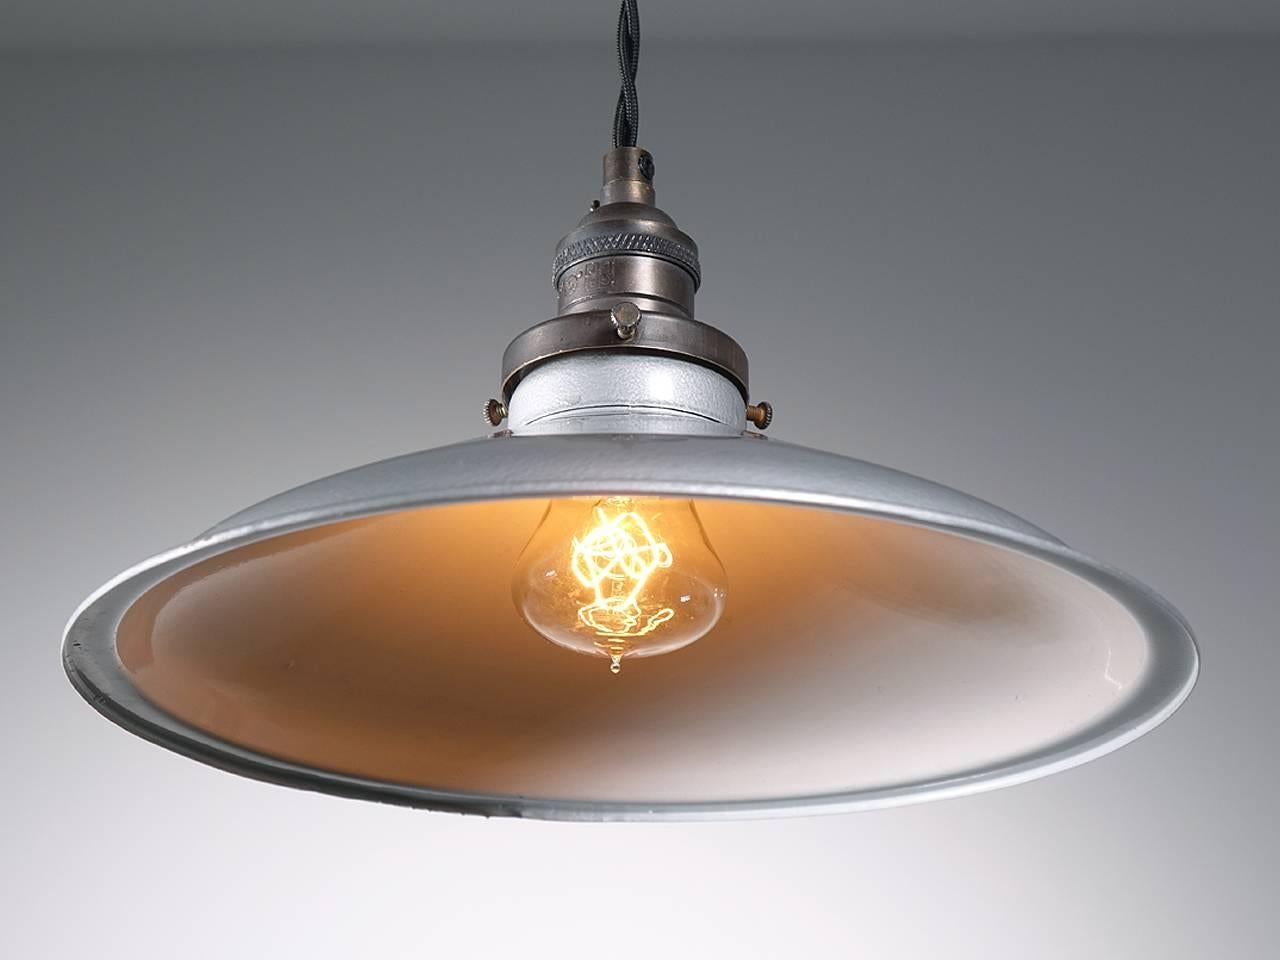 When you think industrial lighting this is the look most envision first. This classic silver over white paint finish on a pressed tin shade. The silver gray paint has an interesting two-tone hammered look. The feel is a bit less industrial with a